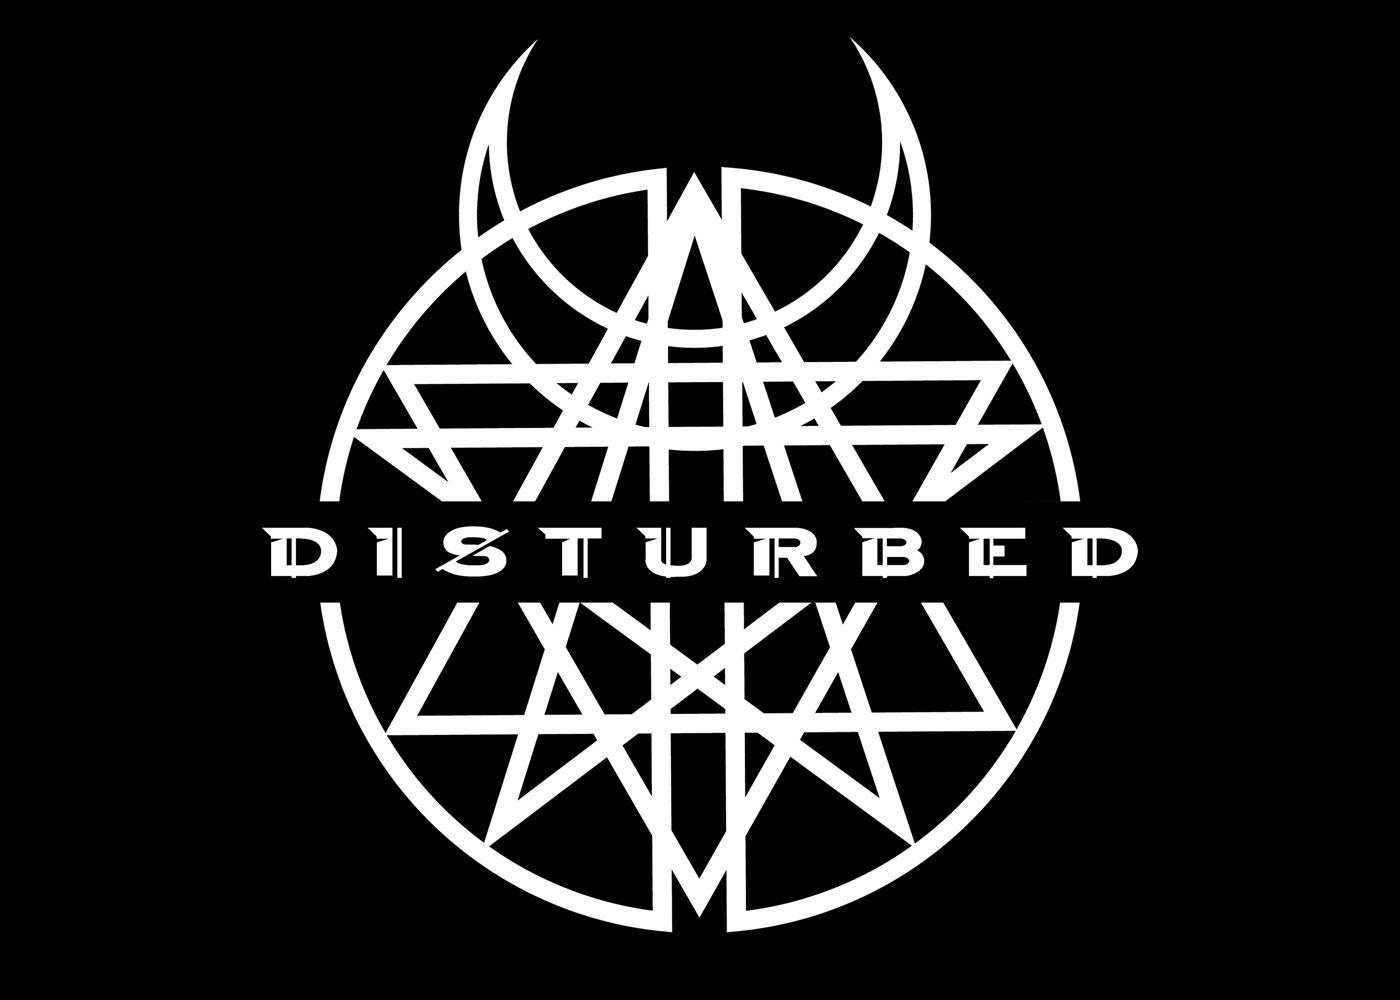 Disturbed Logo - Disturbed Logo, Disturbed Symbol, Meaning, History and Evolution